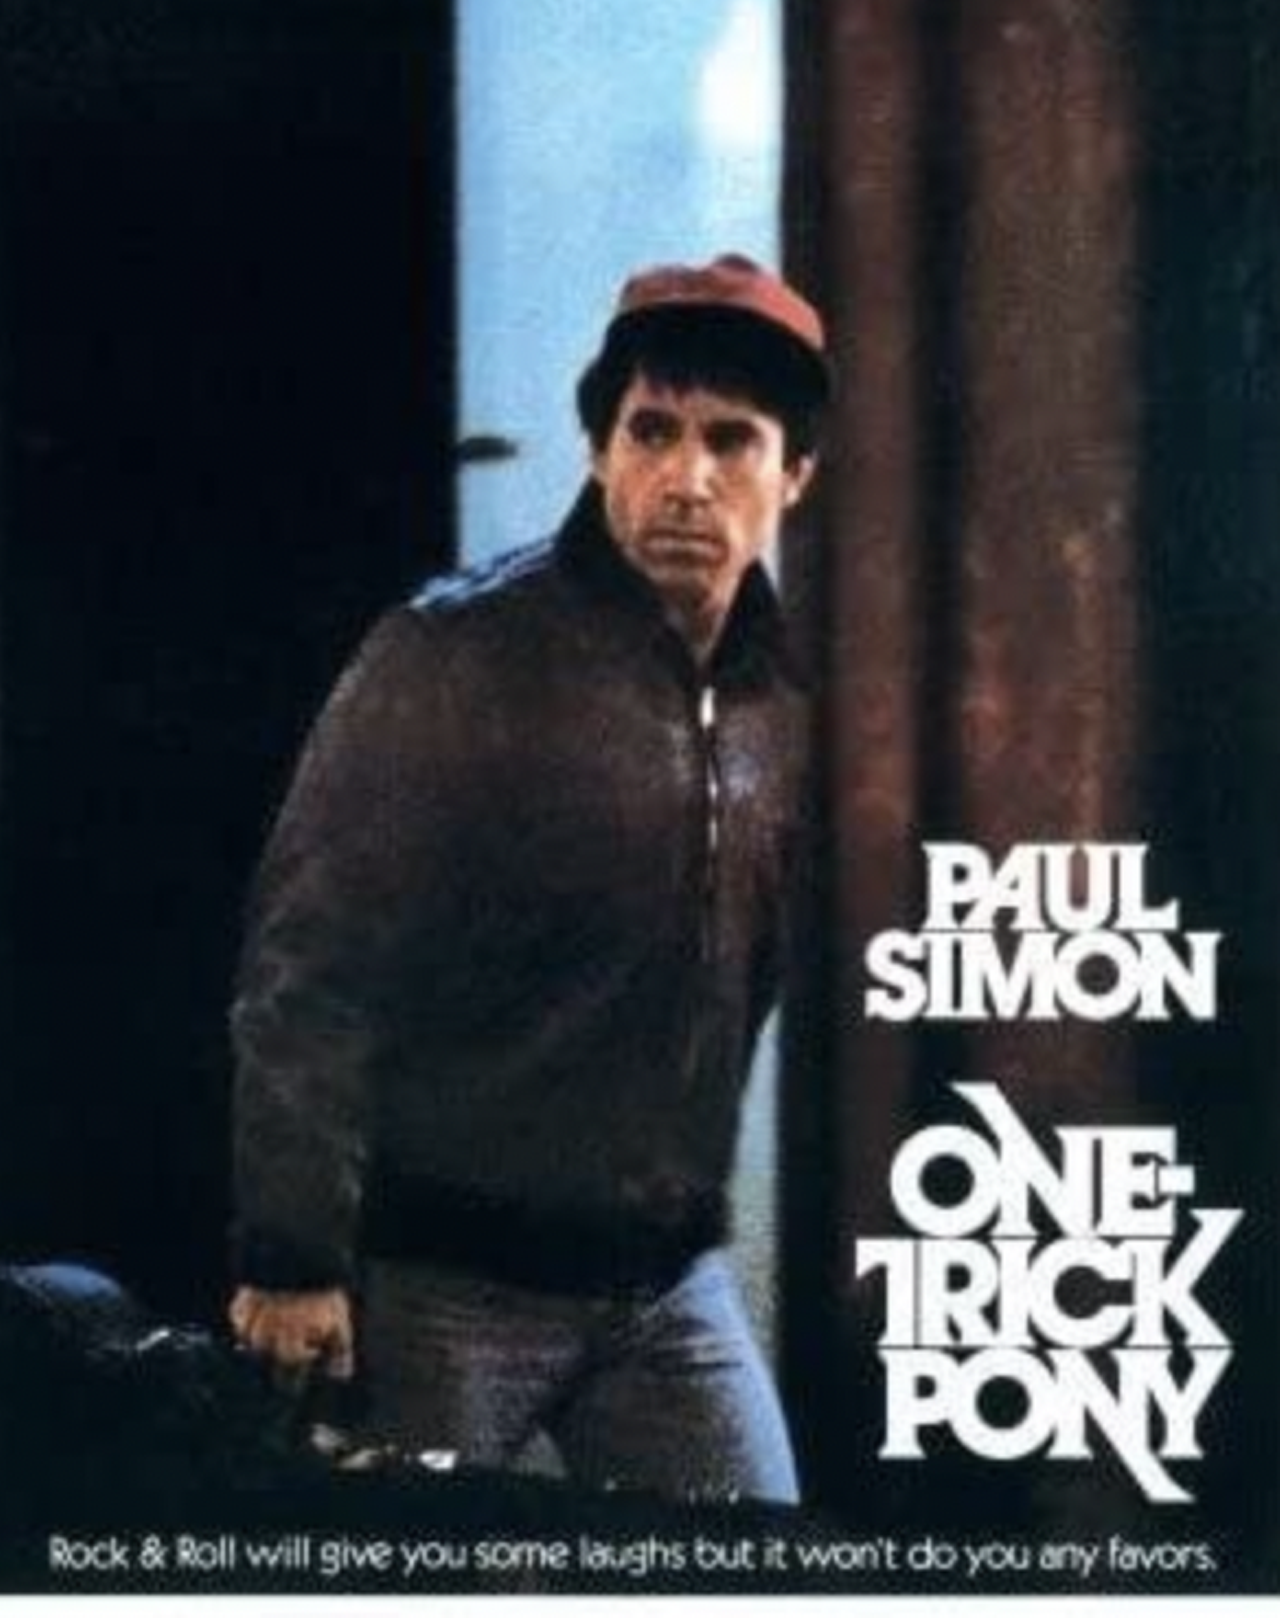   One Trick Pony  (1980) 
Singer/songwriter Paul Simon made a film in 1980 based on the studio album of the same name.  It’s about an aging one-hit wonder played by Simon whose marriage is falling apart while also navigating putting together a new album. Simon leaves his wife back home in New York and plays smaller and smaller clubs ... in cities that include, yes, Cleveland. The film tanked, but song "Late in the Evening" made it to No. 6 on the Billboard charts.